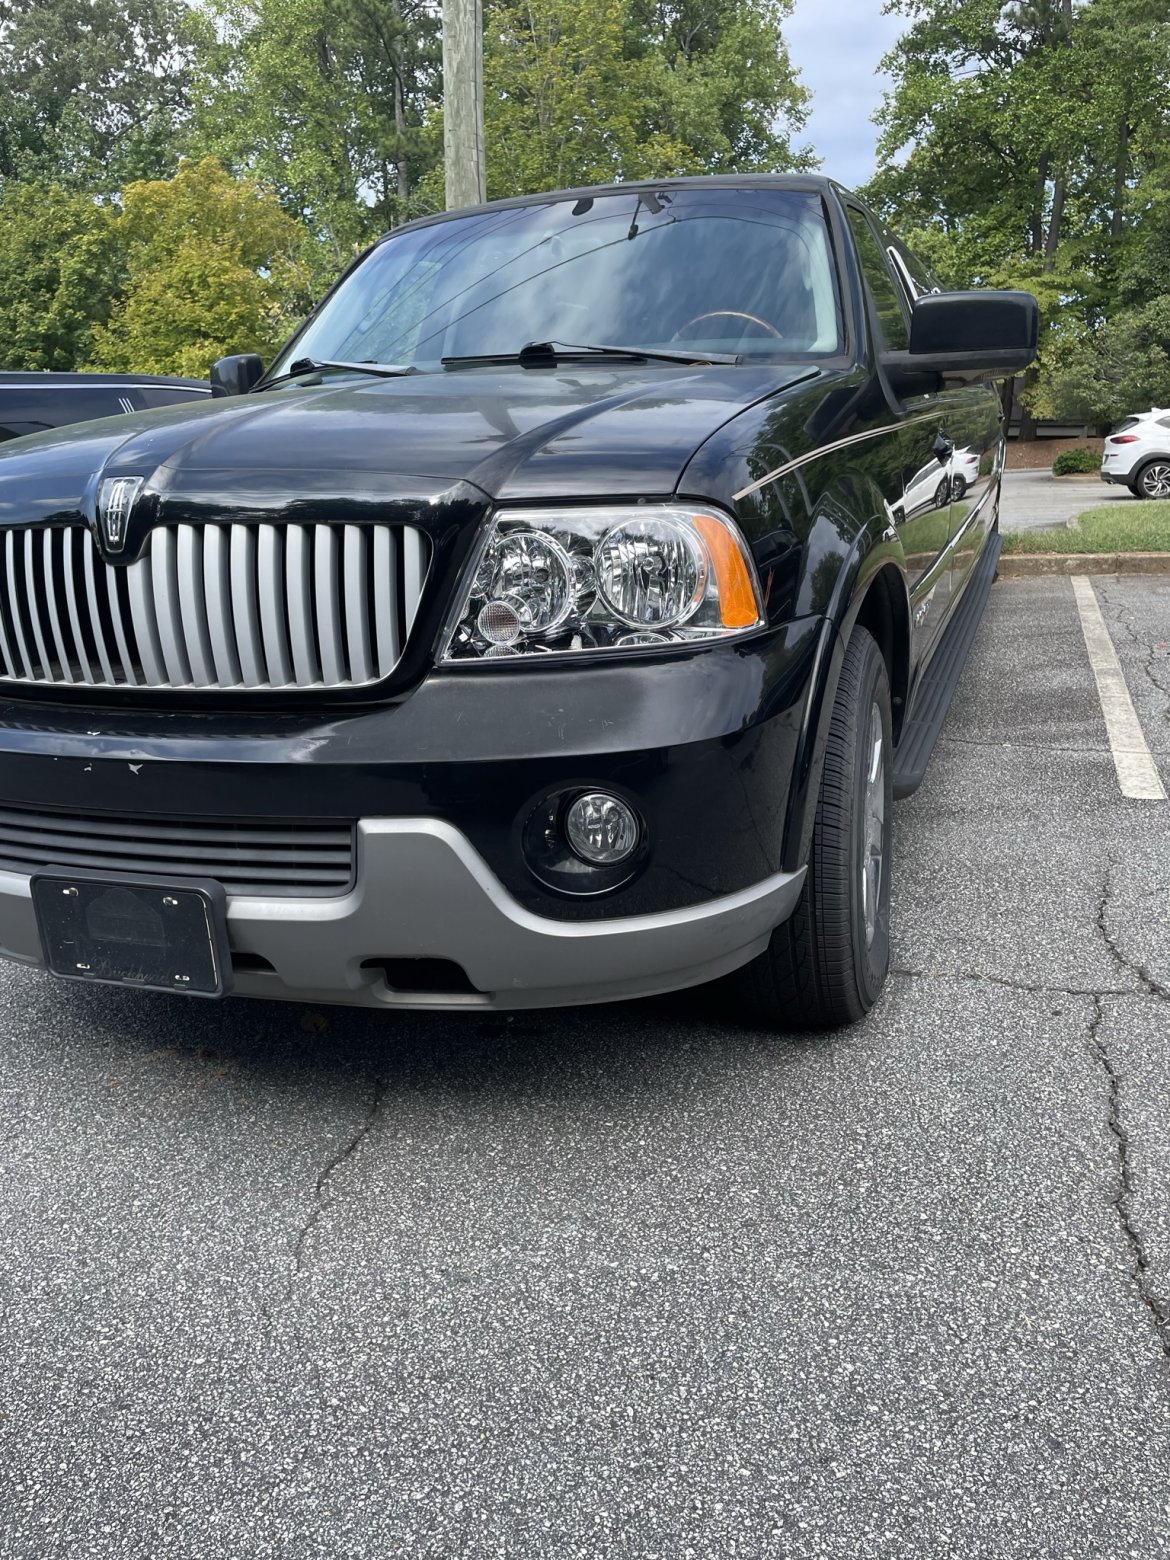 Limousine for sale: 2004 Lincoln Navigator 32&quot; by DaBryan